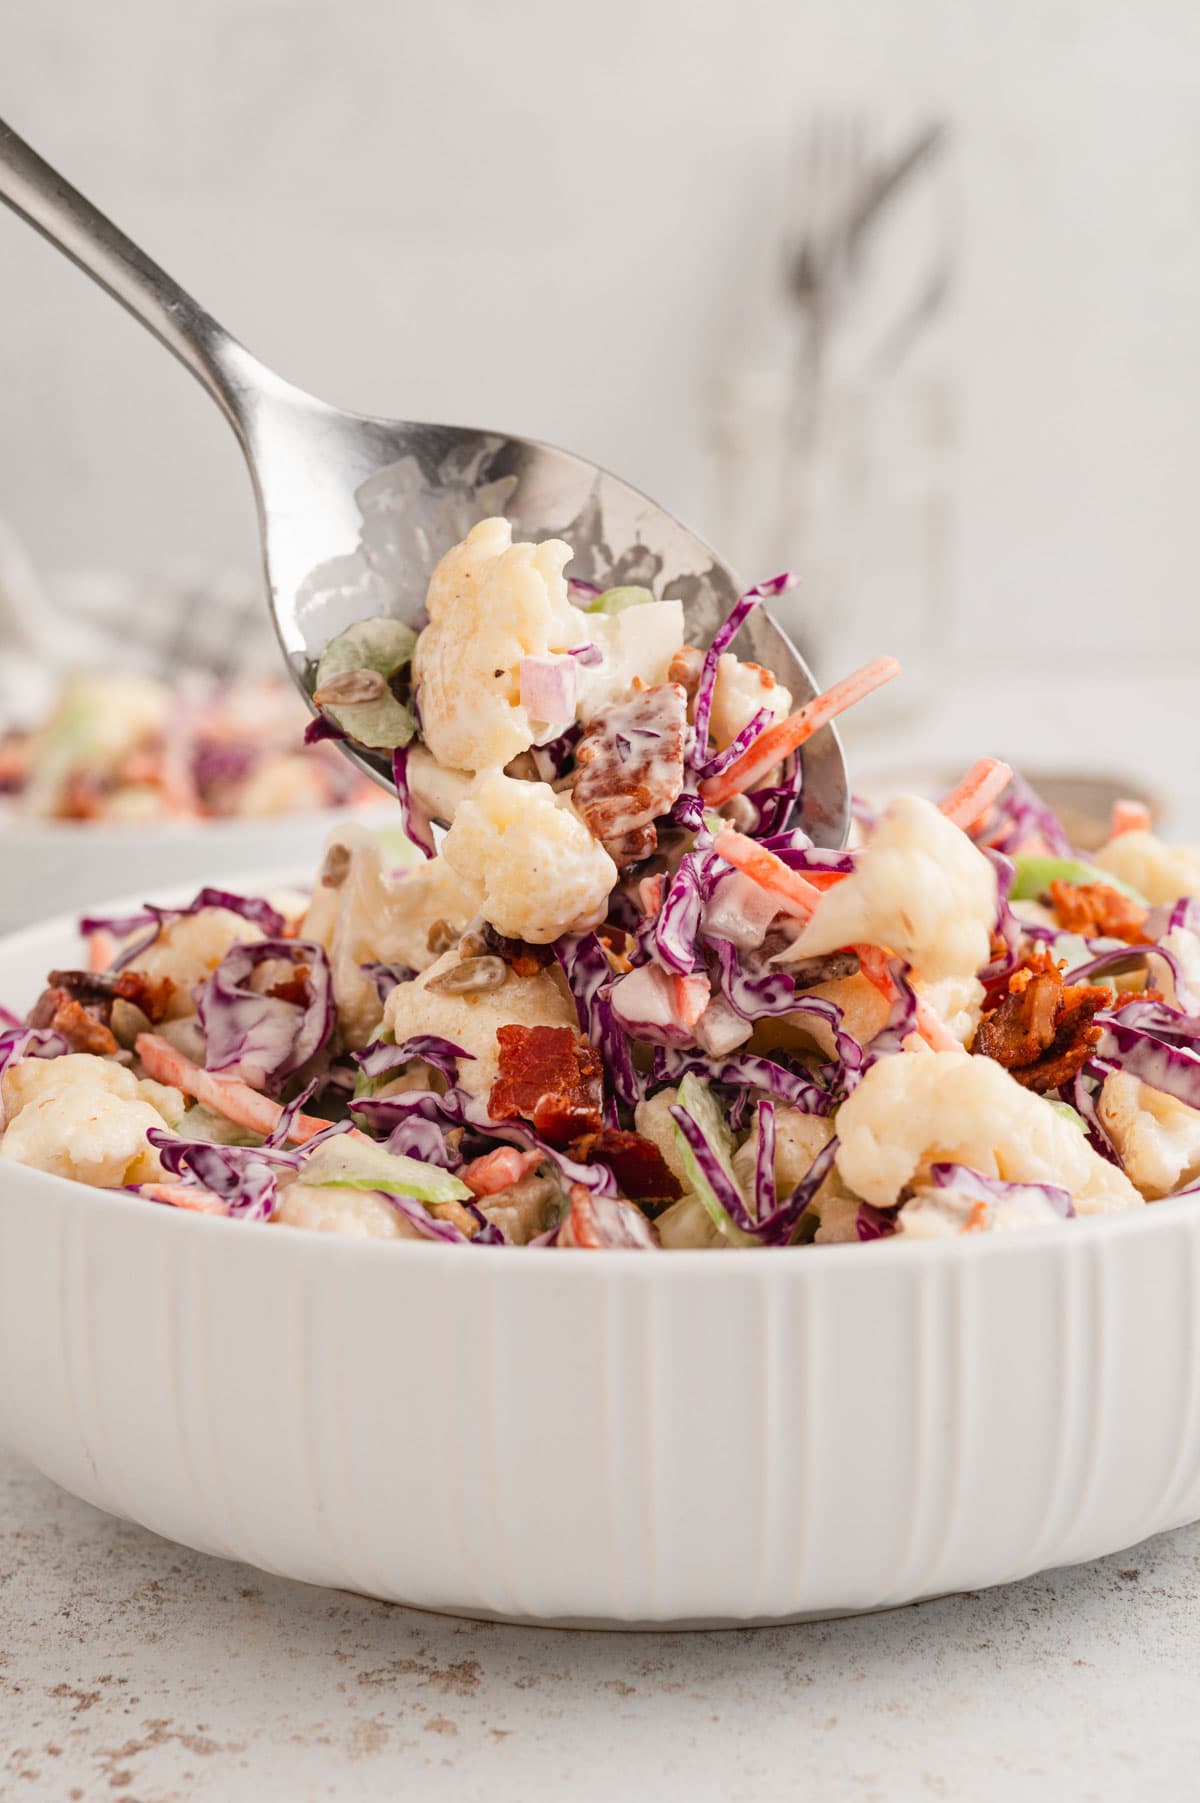 Spoon with cauliflower salad in a white dish.